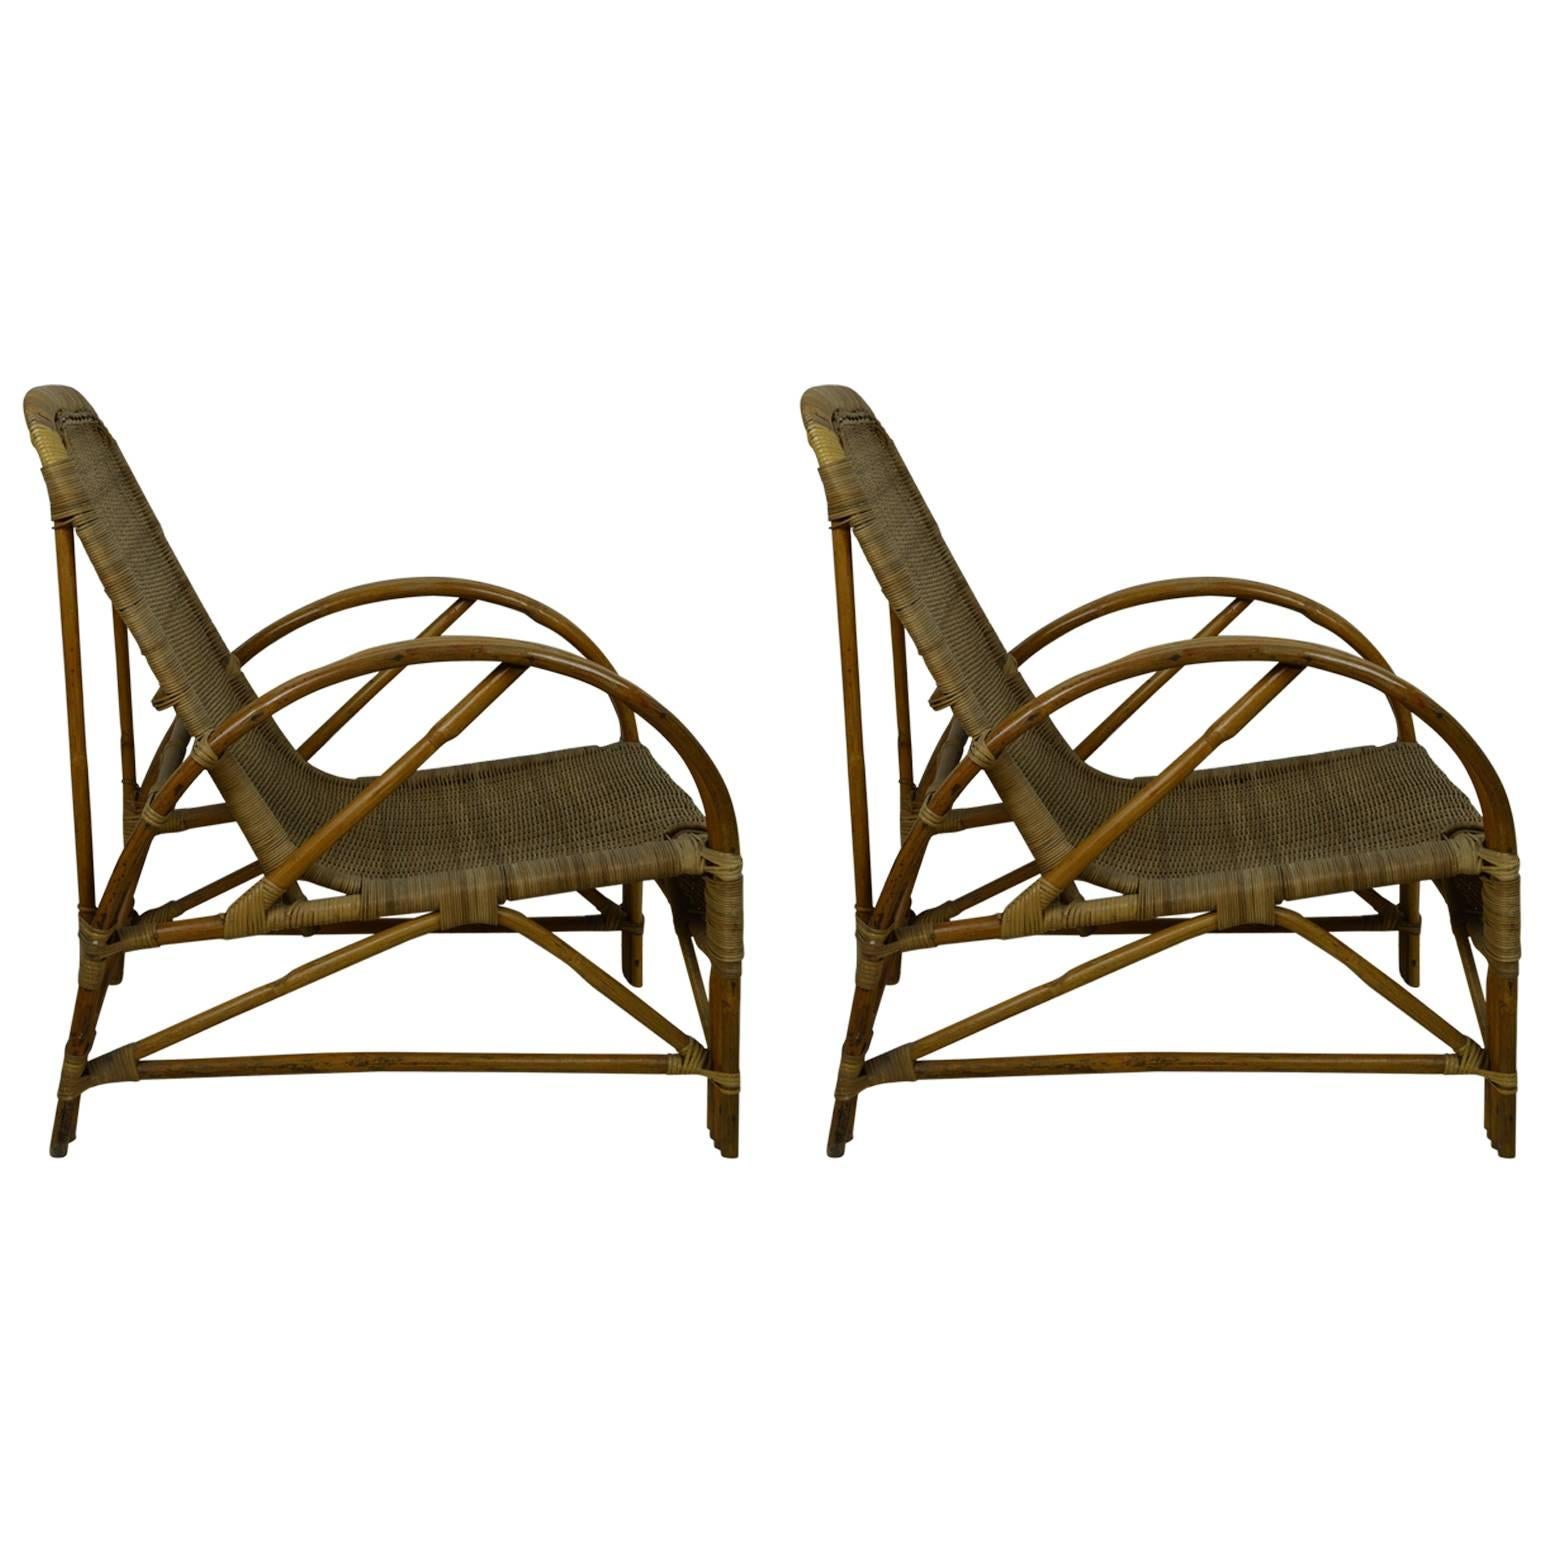 Pair of Vintage Midcentury Bamboo and Rattan Chairs